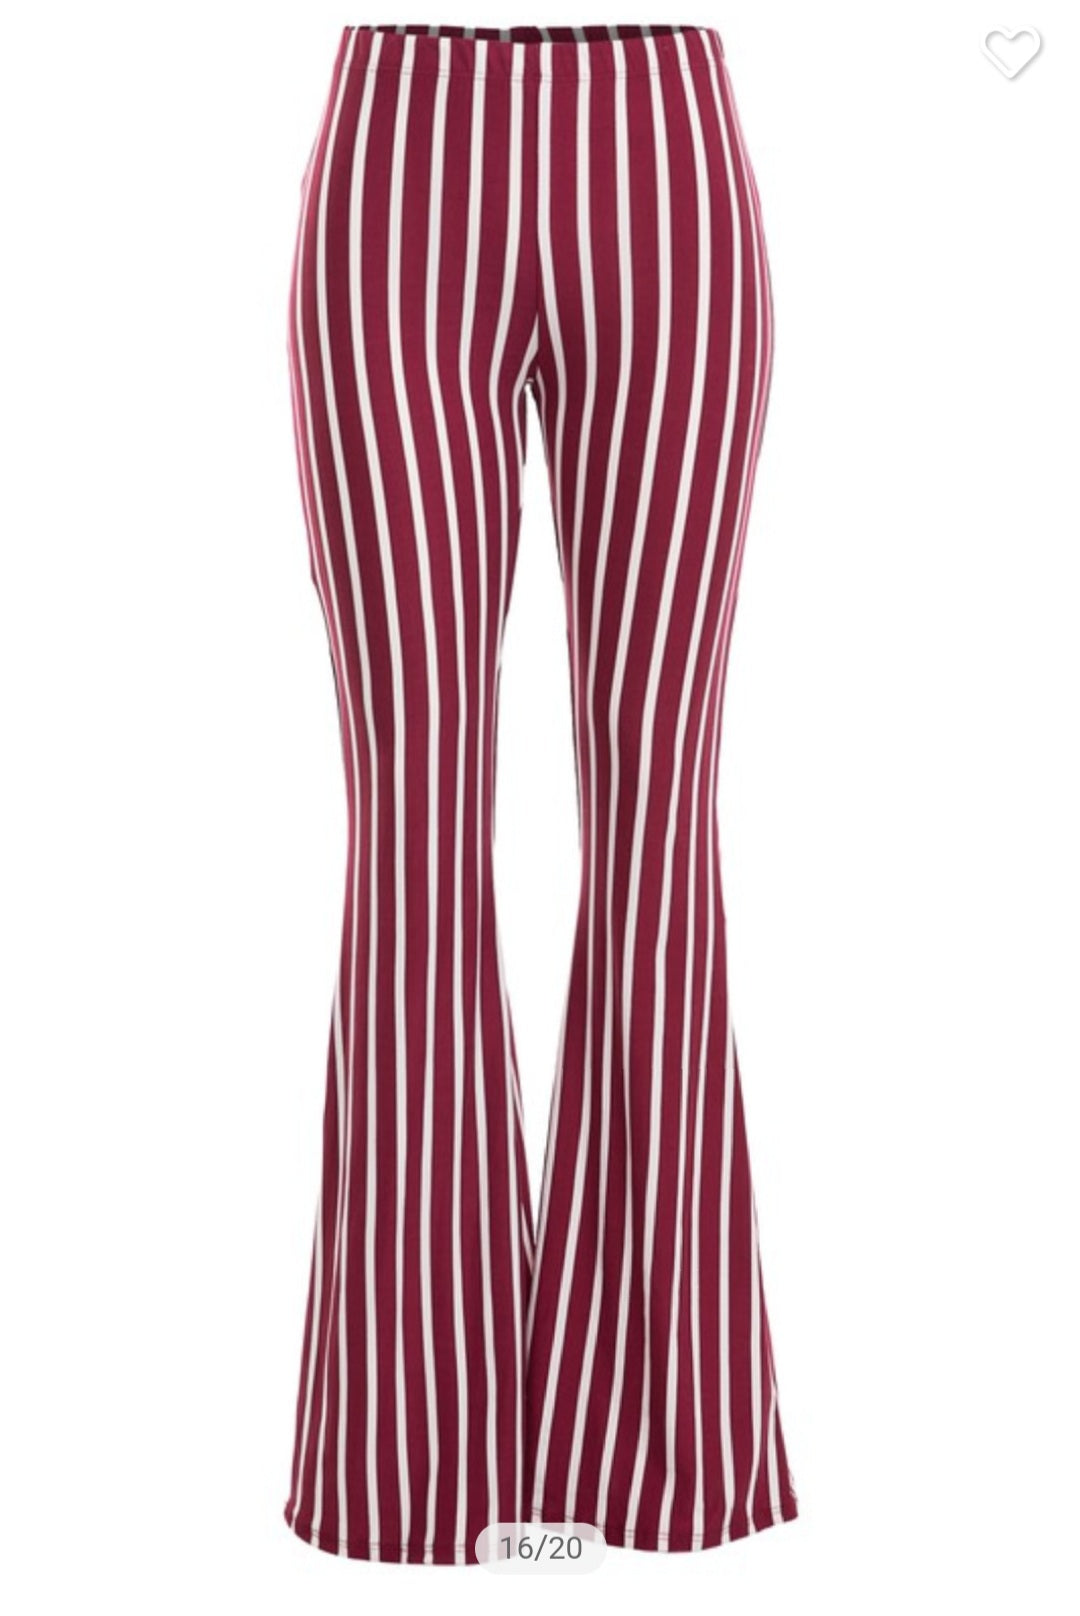 Striped Bell Pants